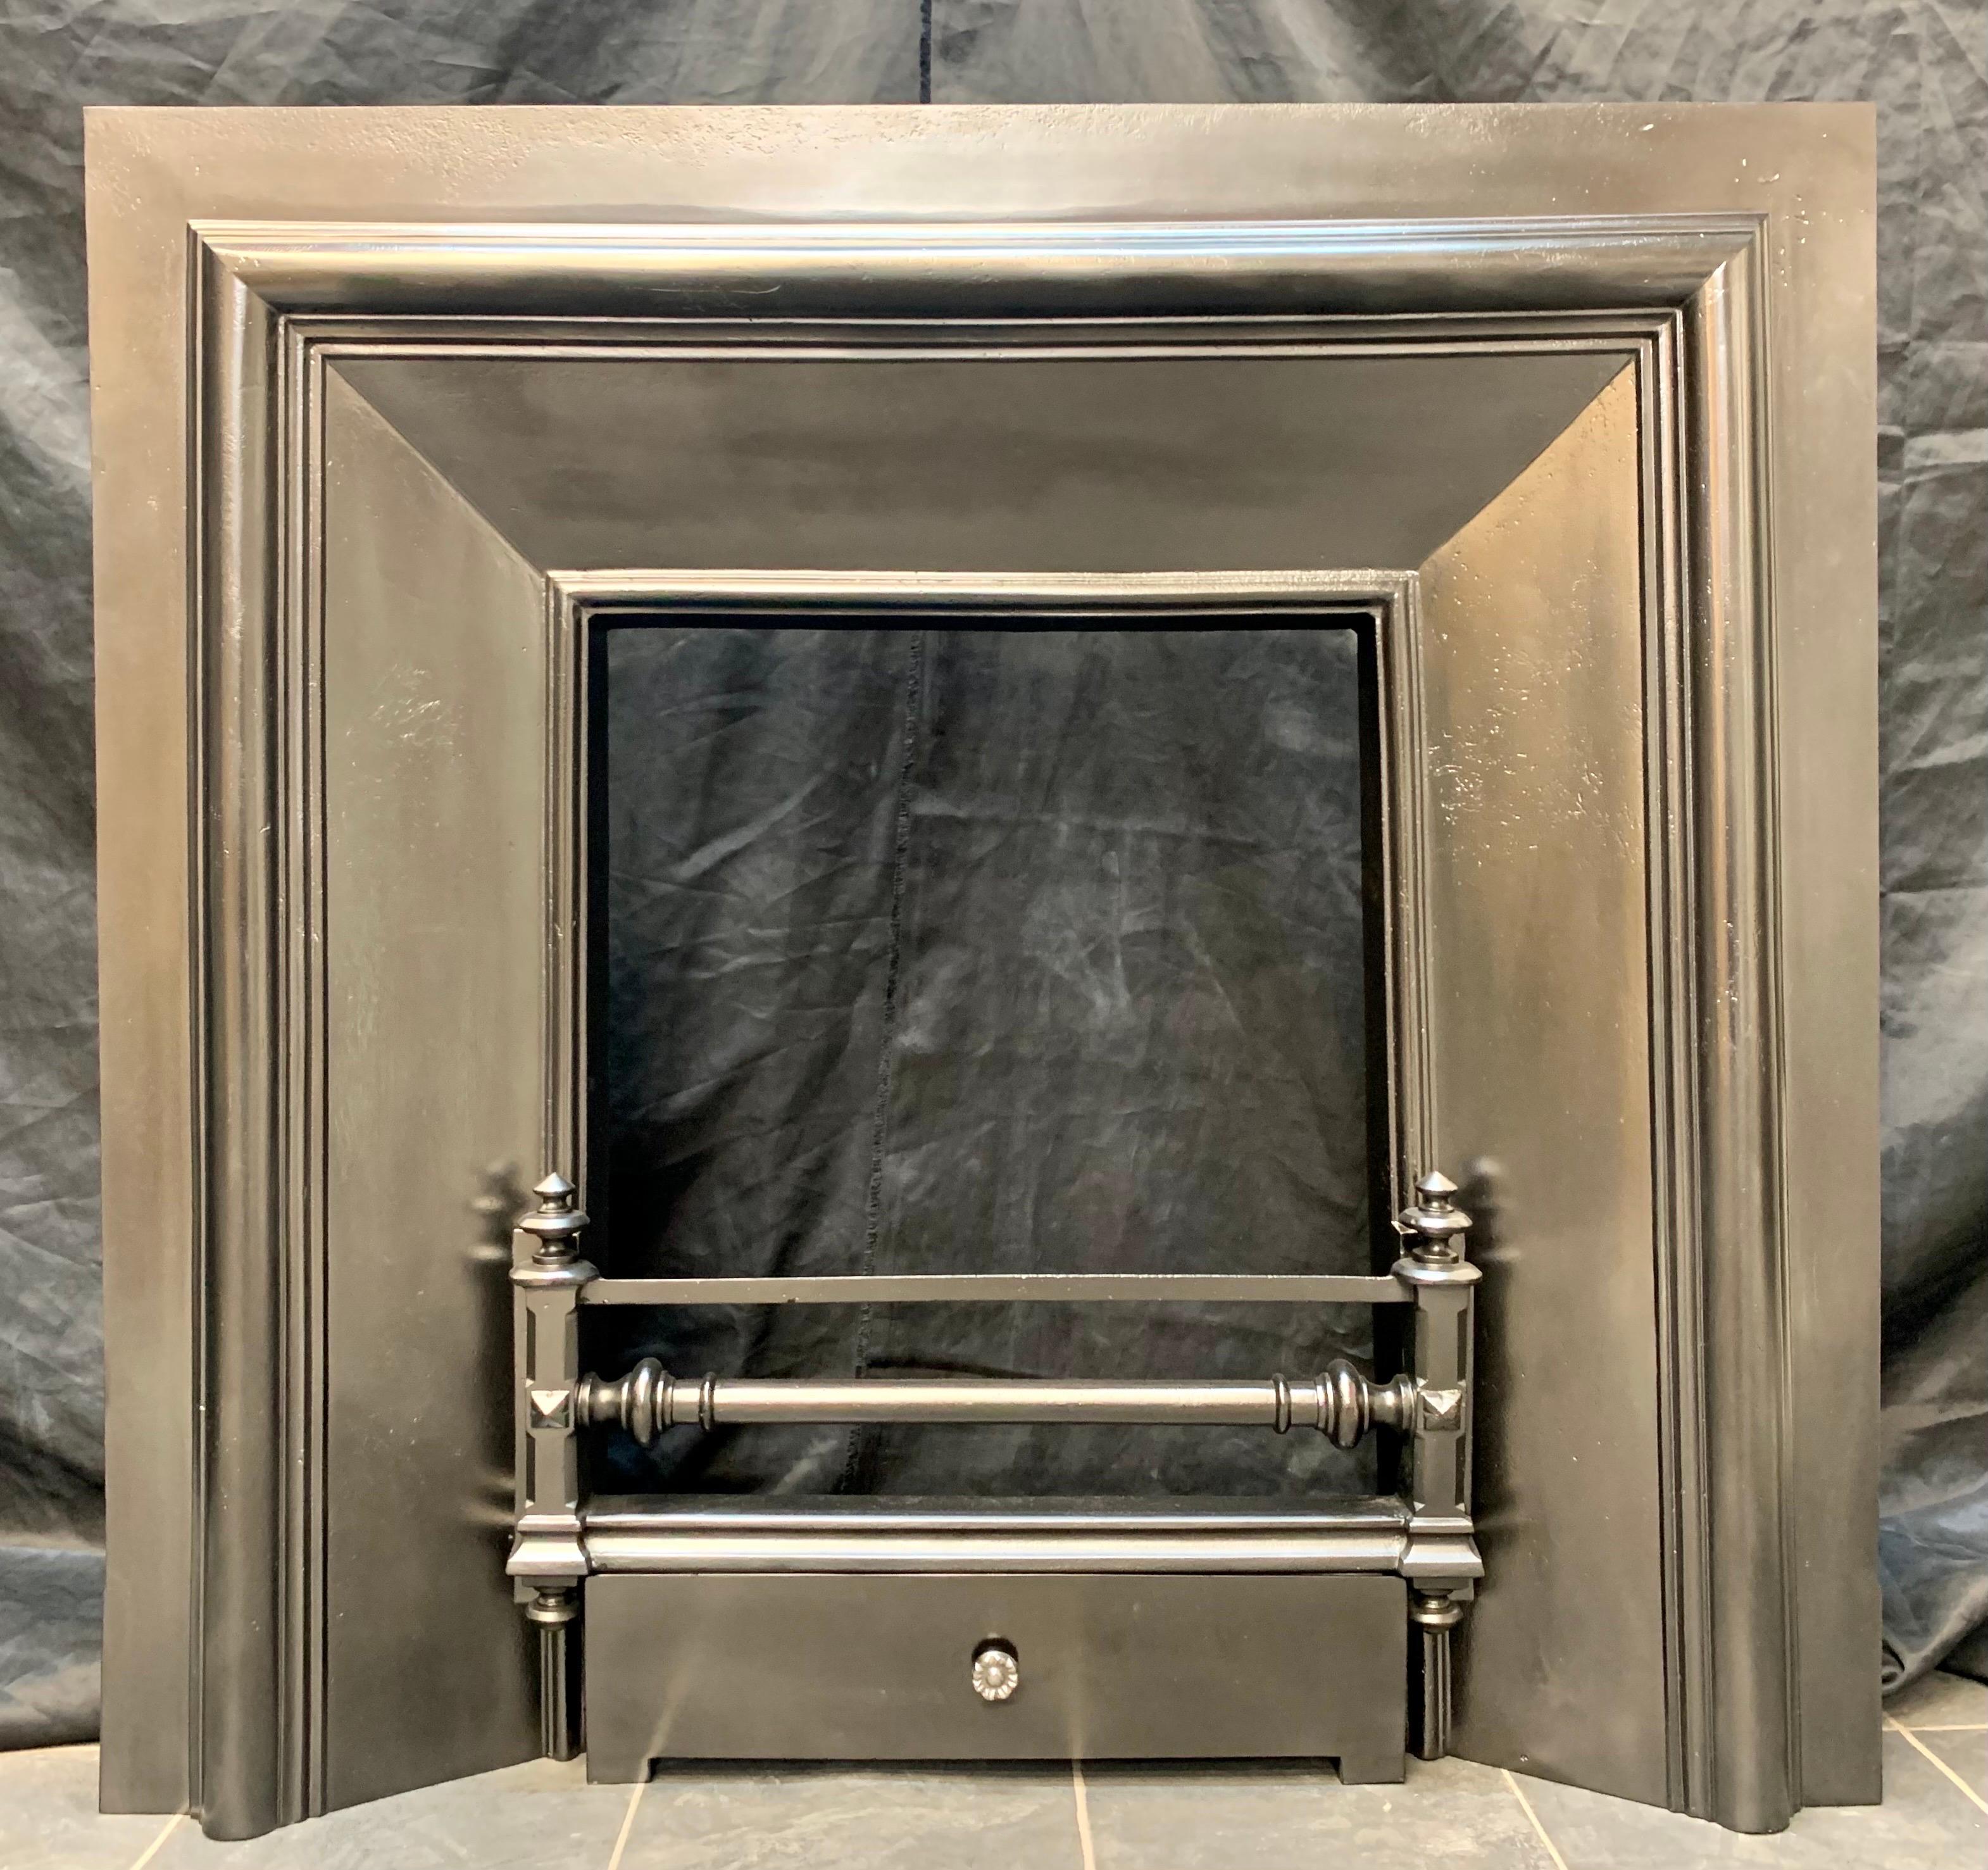 A simple 19th century Scottish splayed cast iron fireplace insert. A generous outer plate, with a projected raised moulding to the outer aperture and inwards splayed side panels, a three barred fire front with finishing finials top and bottom, plain